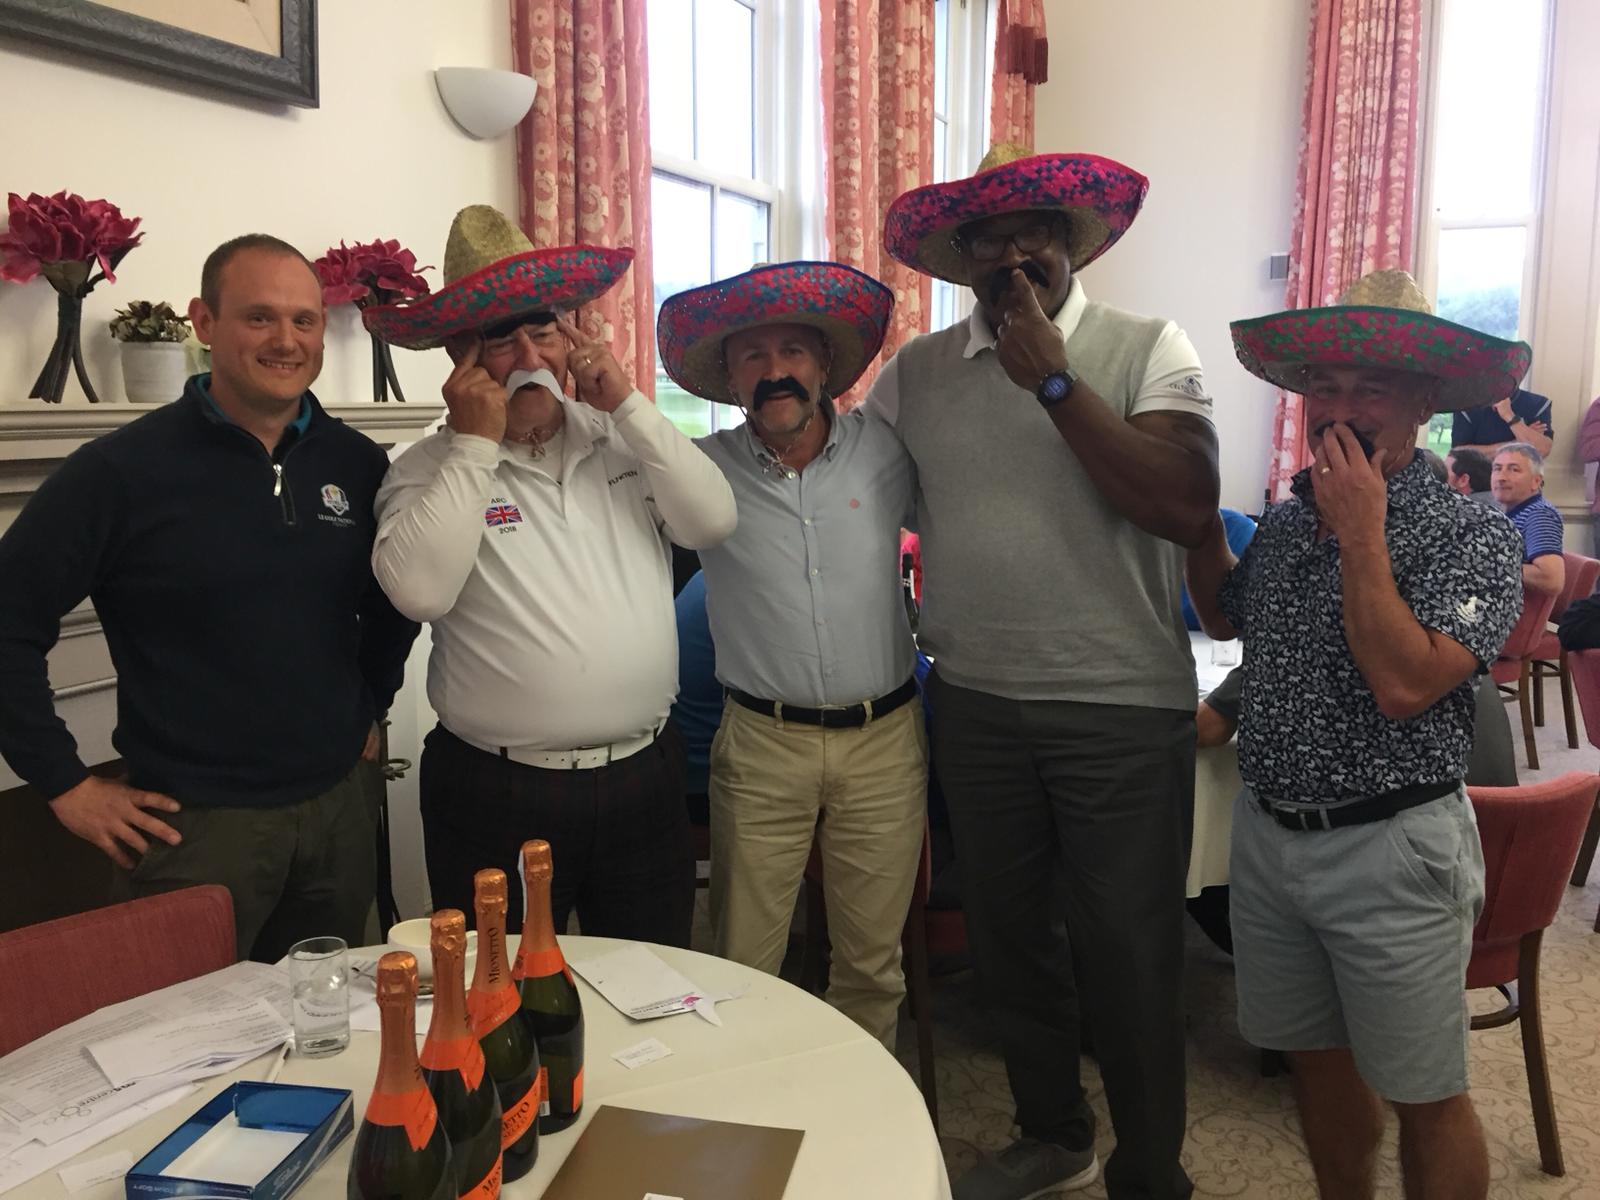 winning team in bandit sombreros at the golf day